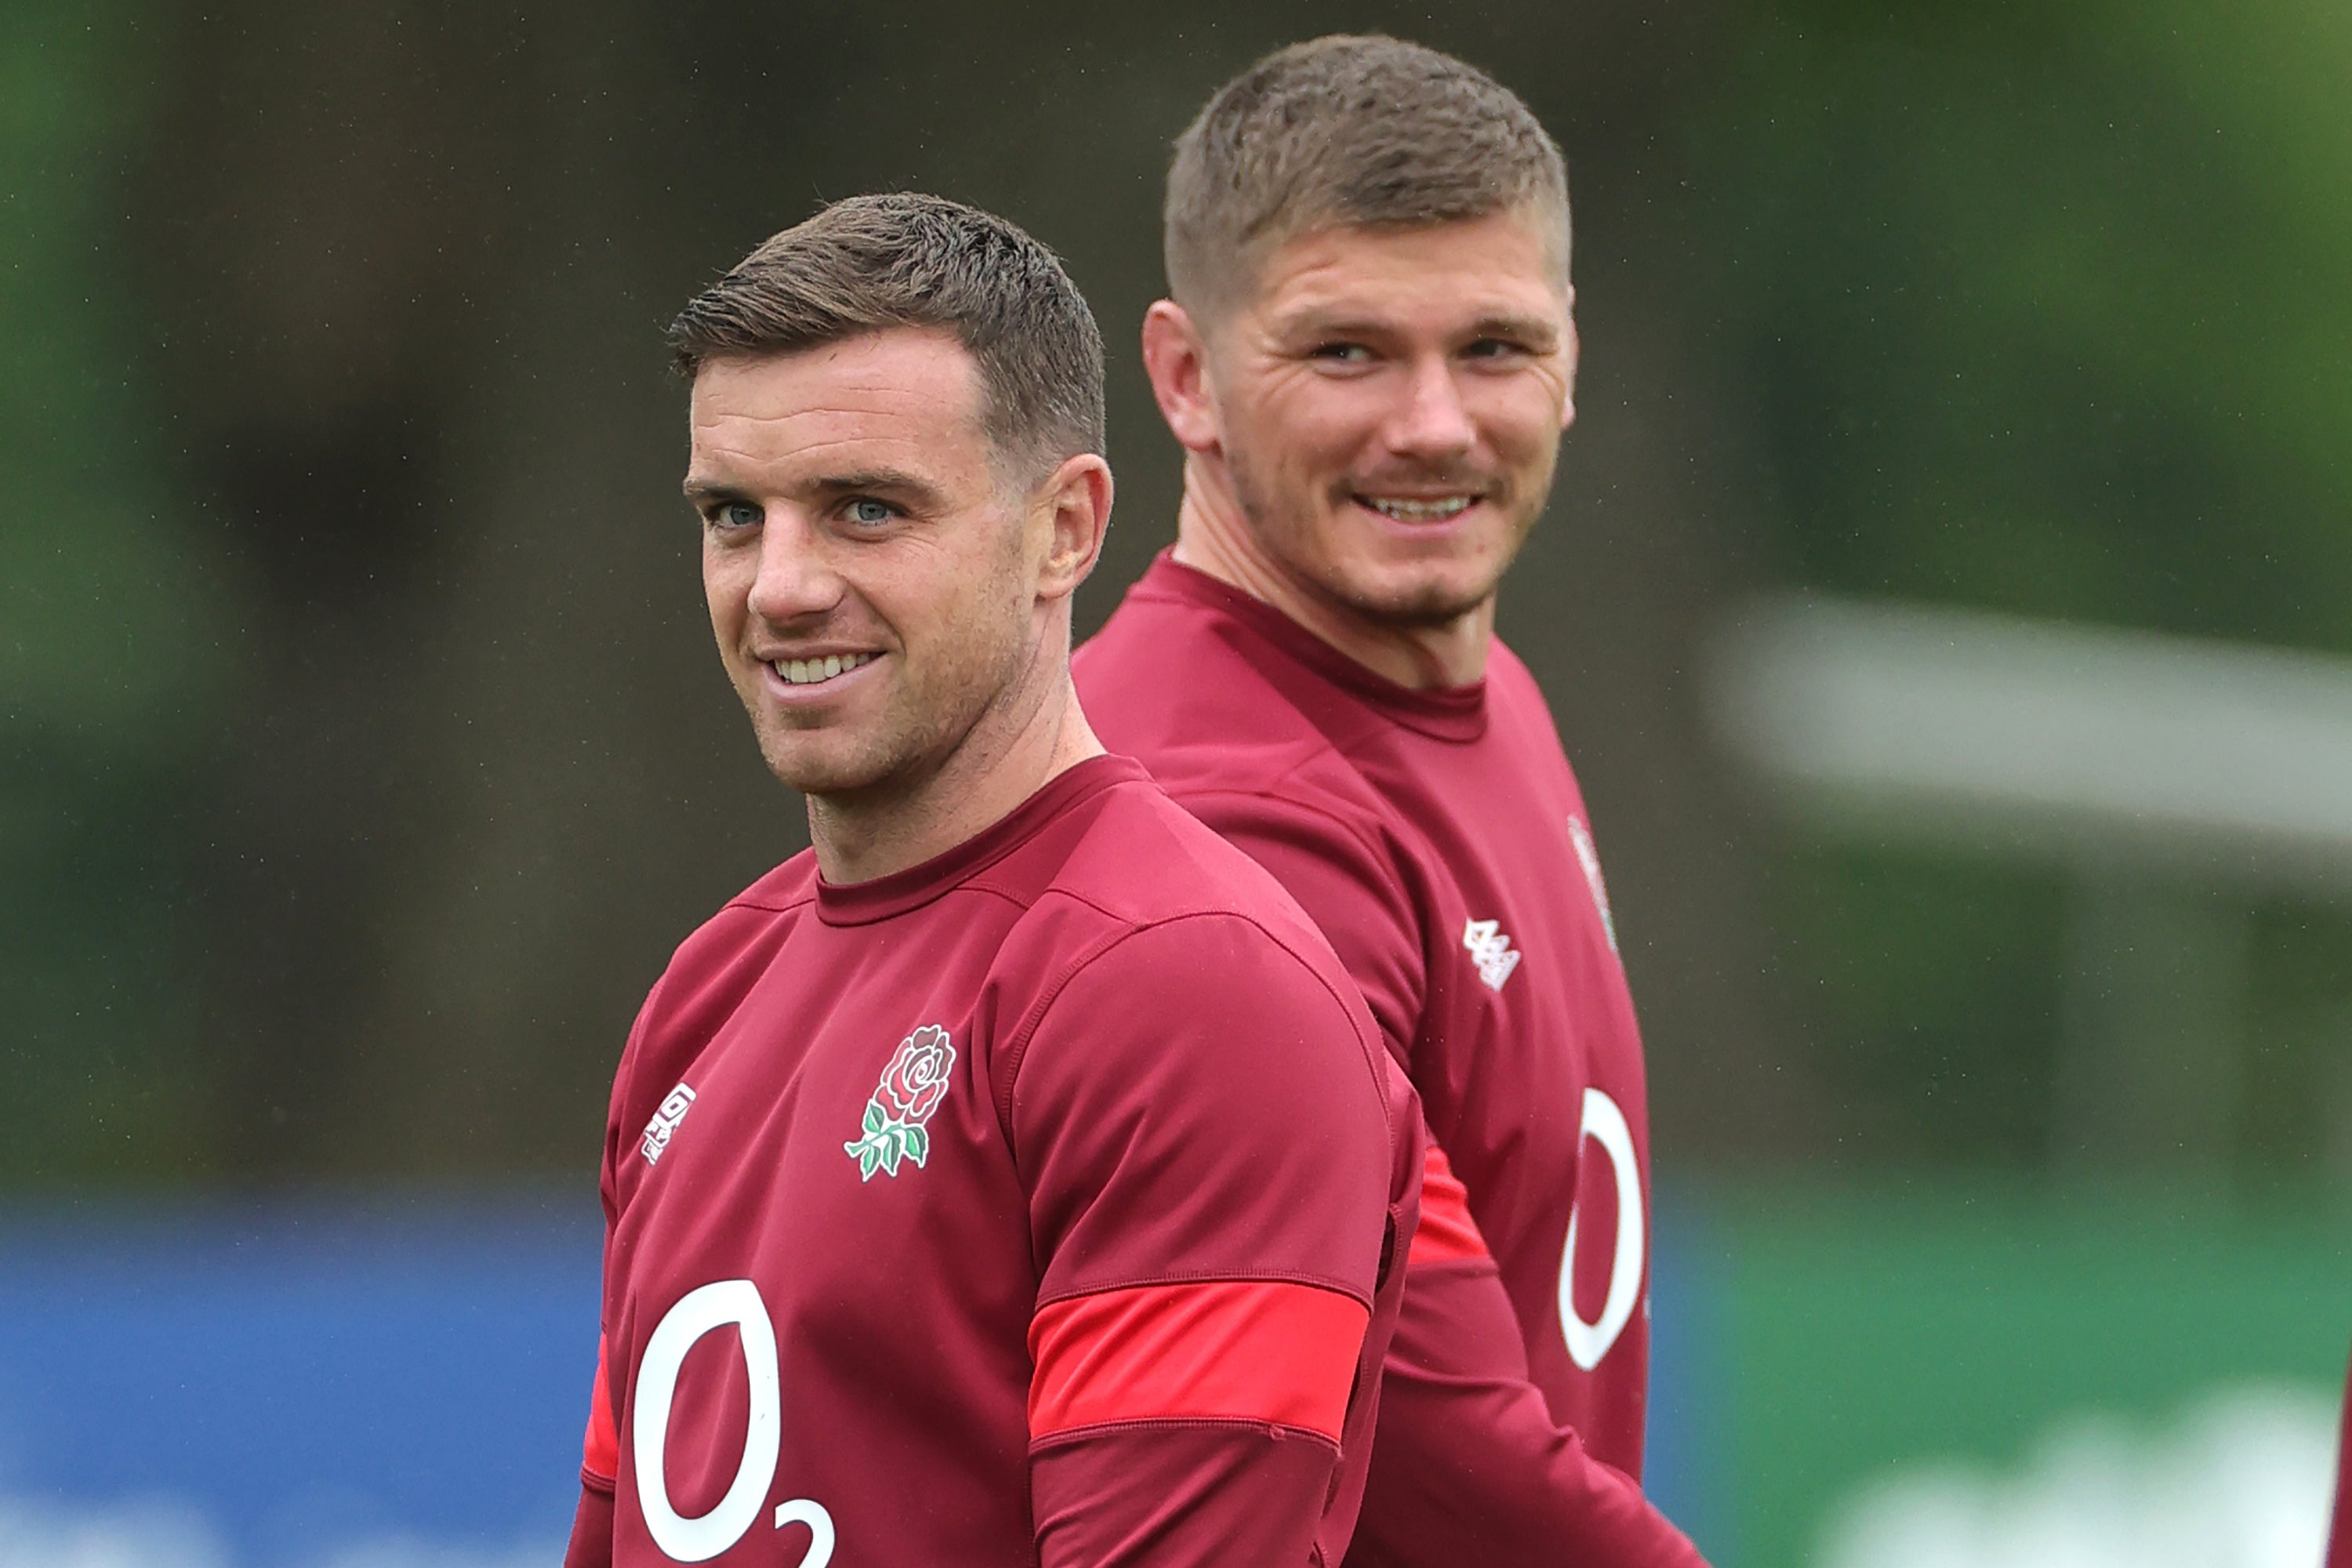 George Ford and Owen Farrell have been reunited in the England line-up